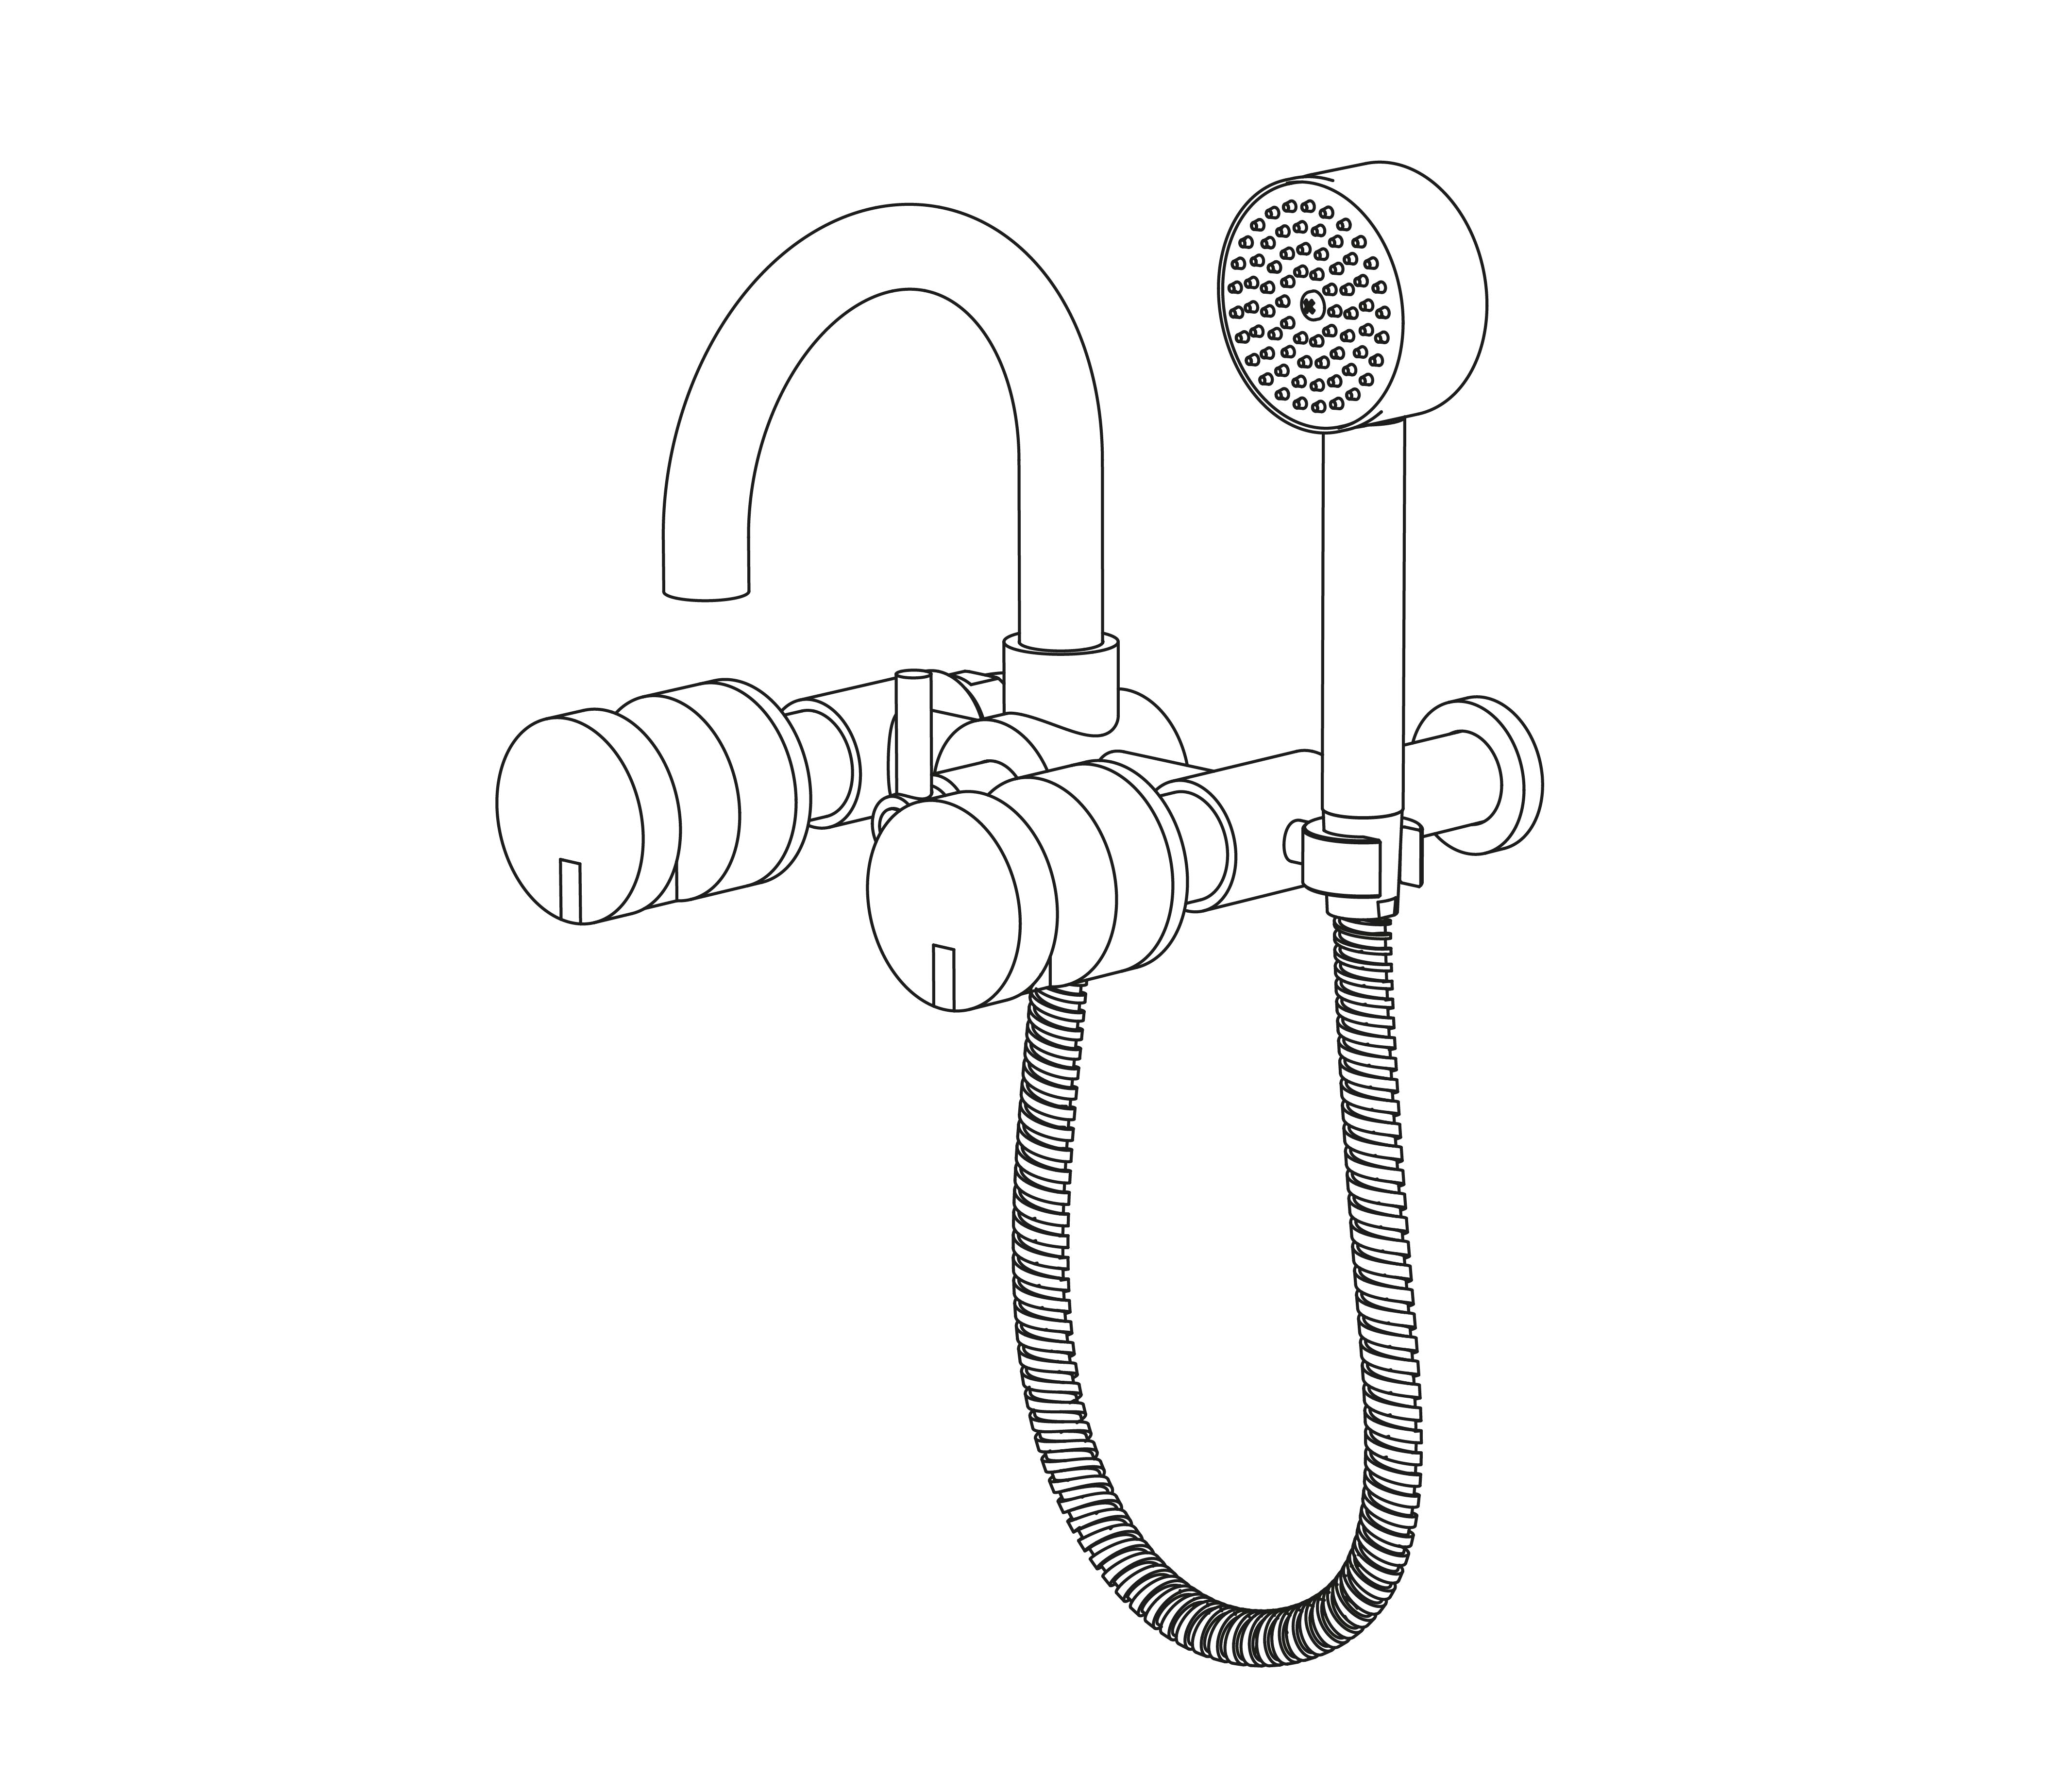 S210-3201 Wall mounted bath and shower mixer